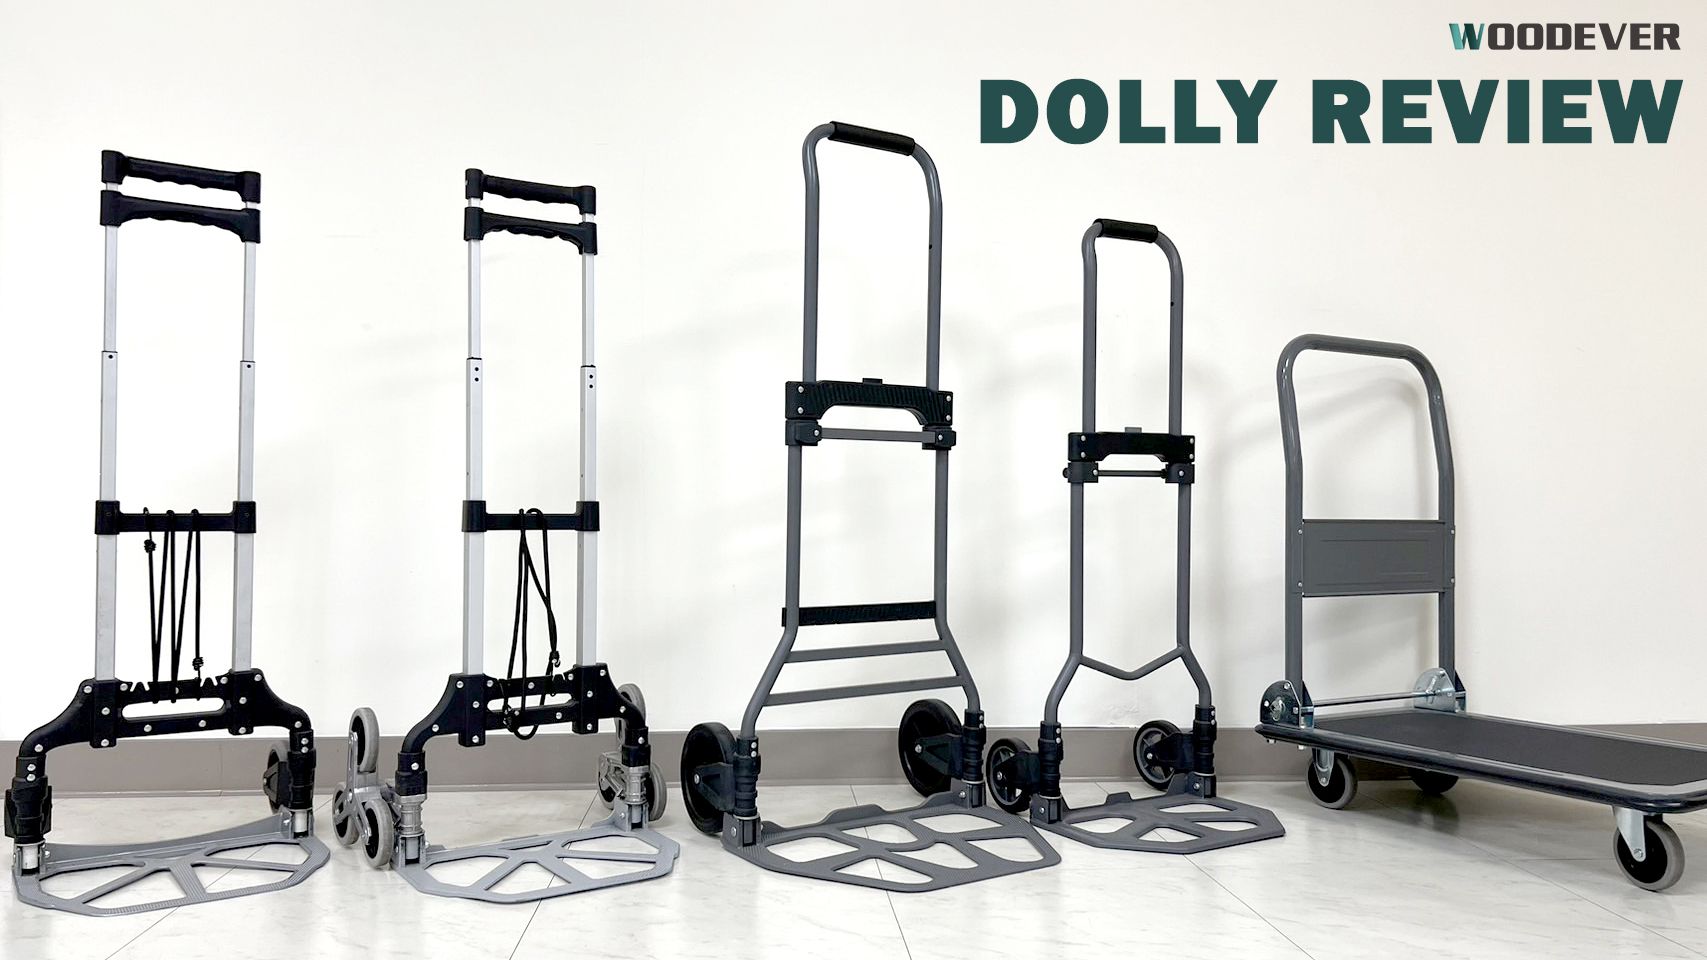 Top 5 Collapsible Dolly Carts for Personal Use, made of durable steel and aluminum, and offered at factory direct prices by WOODEVER.